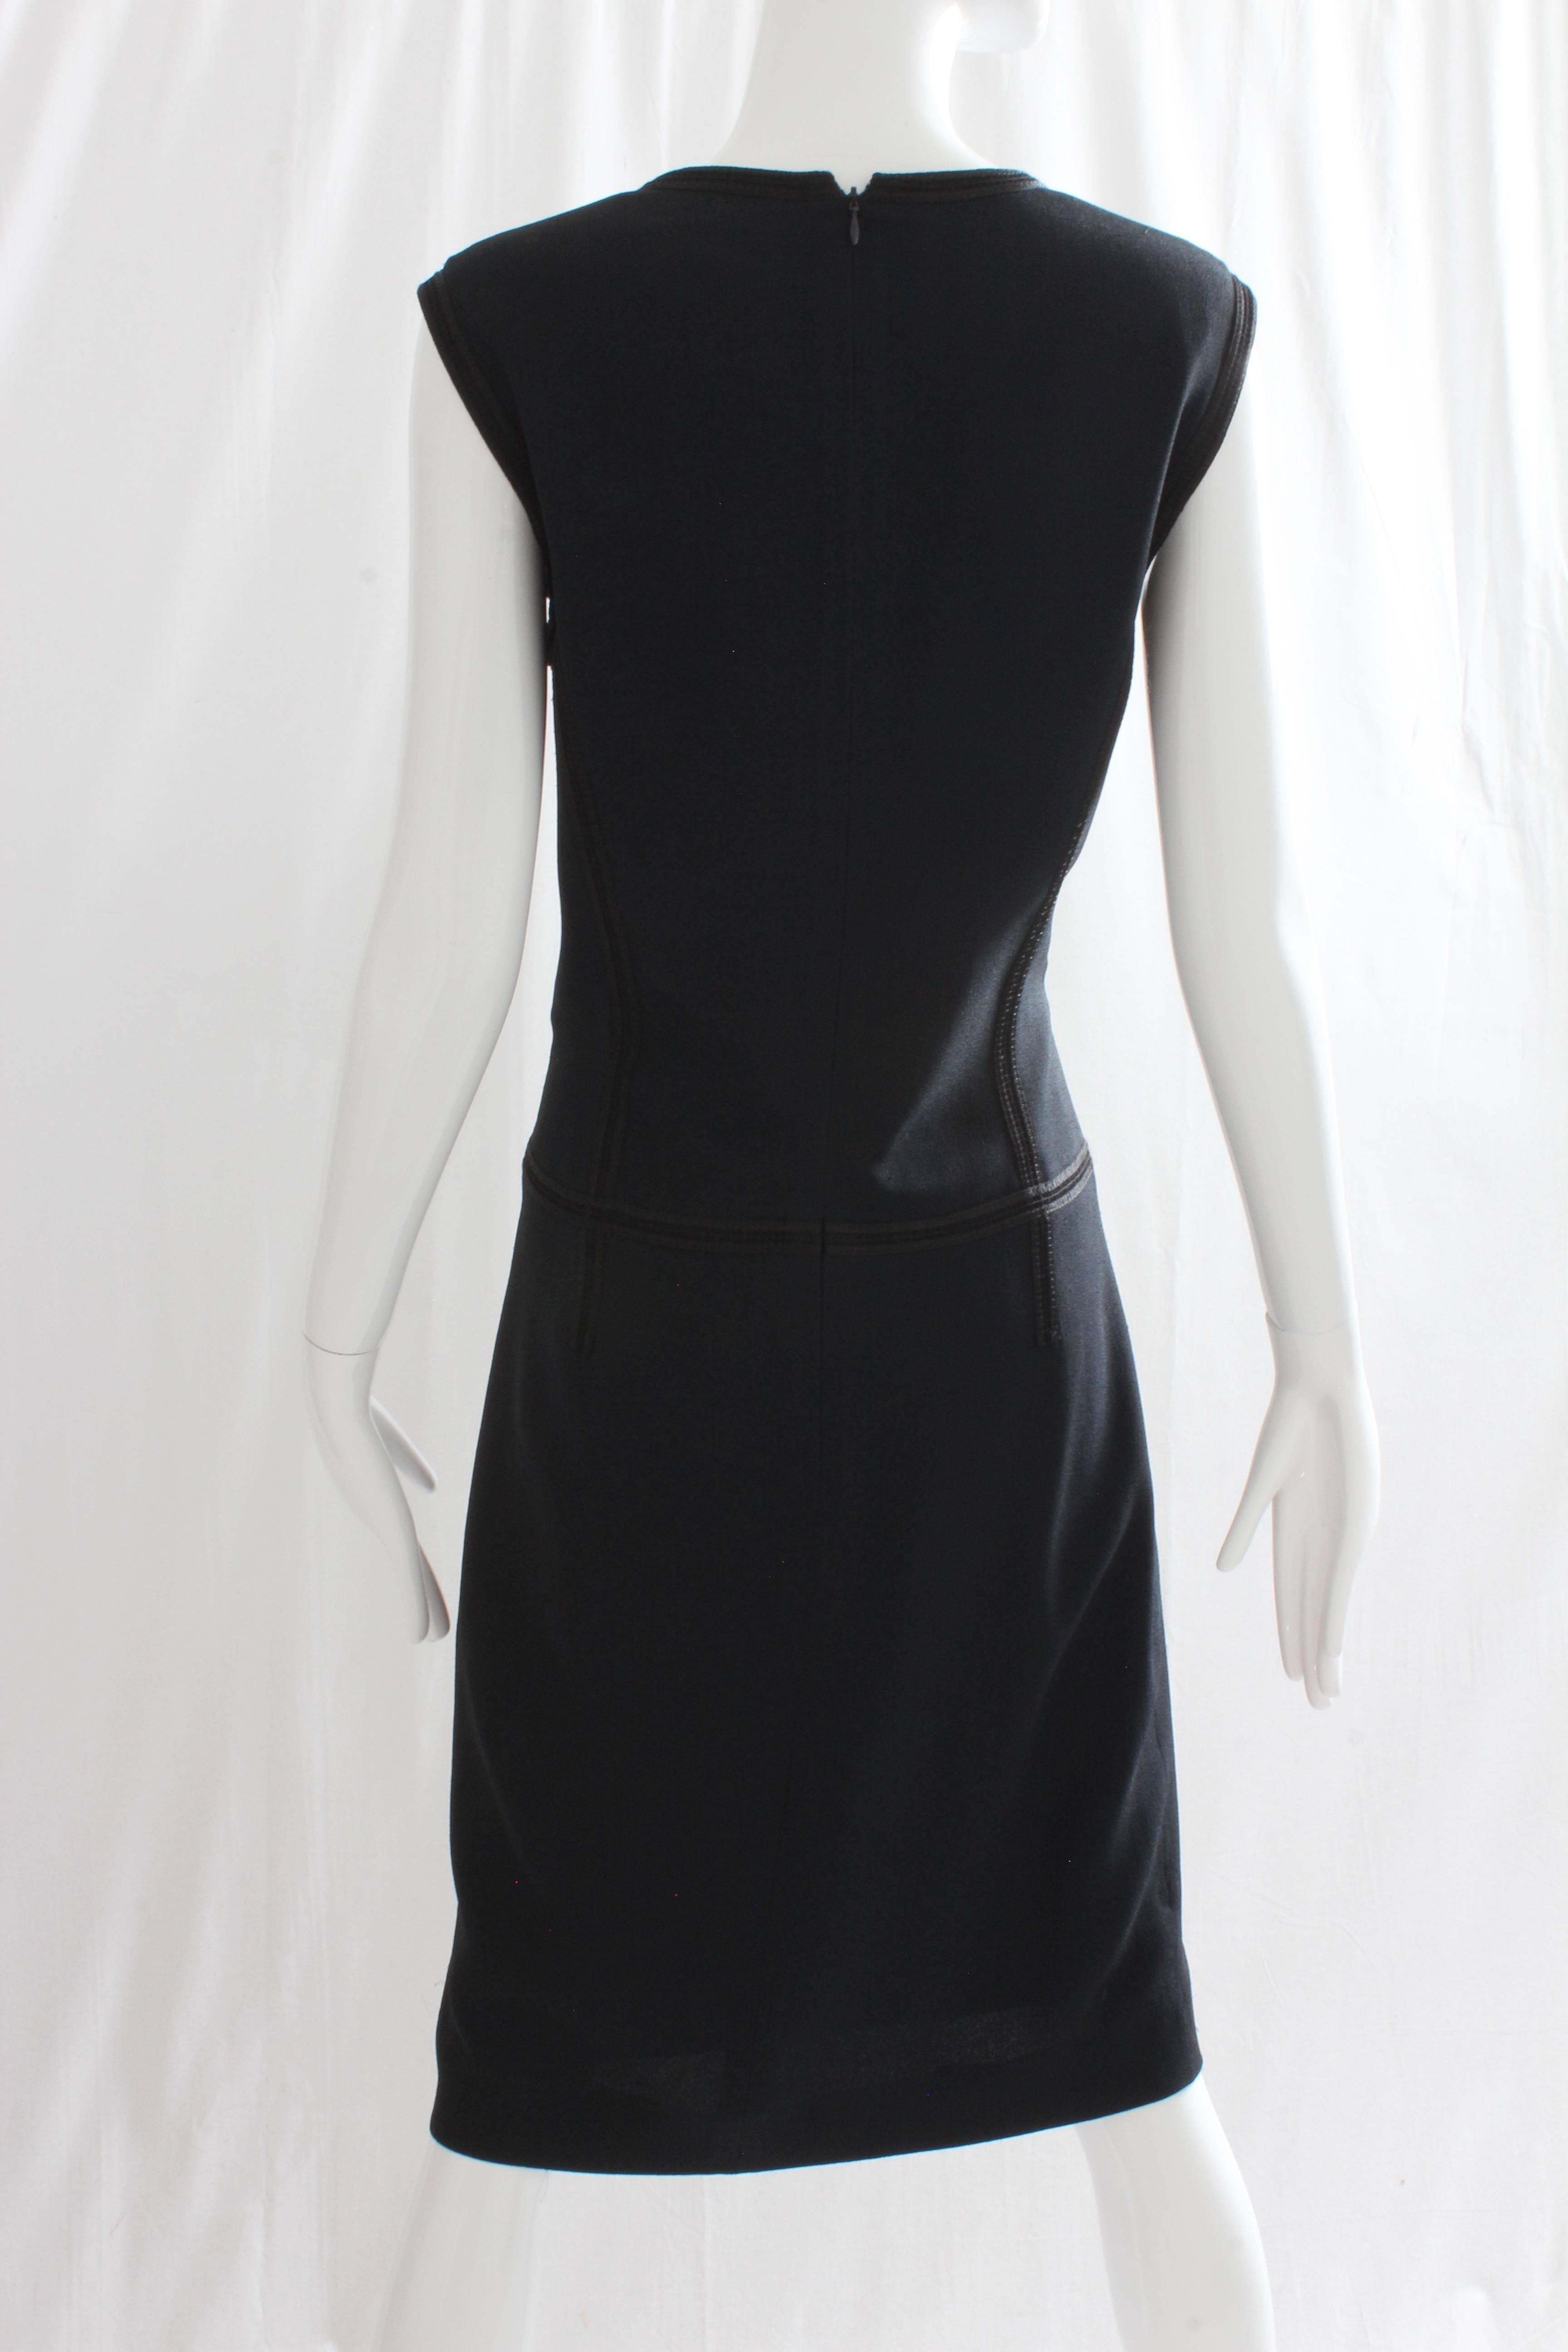 Chanel Sleeveless Dress with Asymmetric Collar and Camellia Buttons Navy Size 44 2